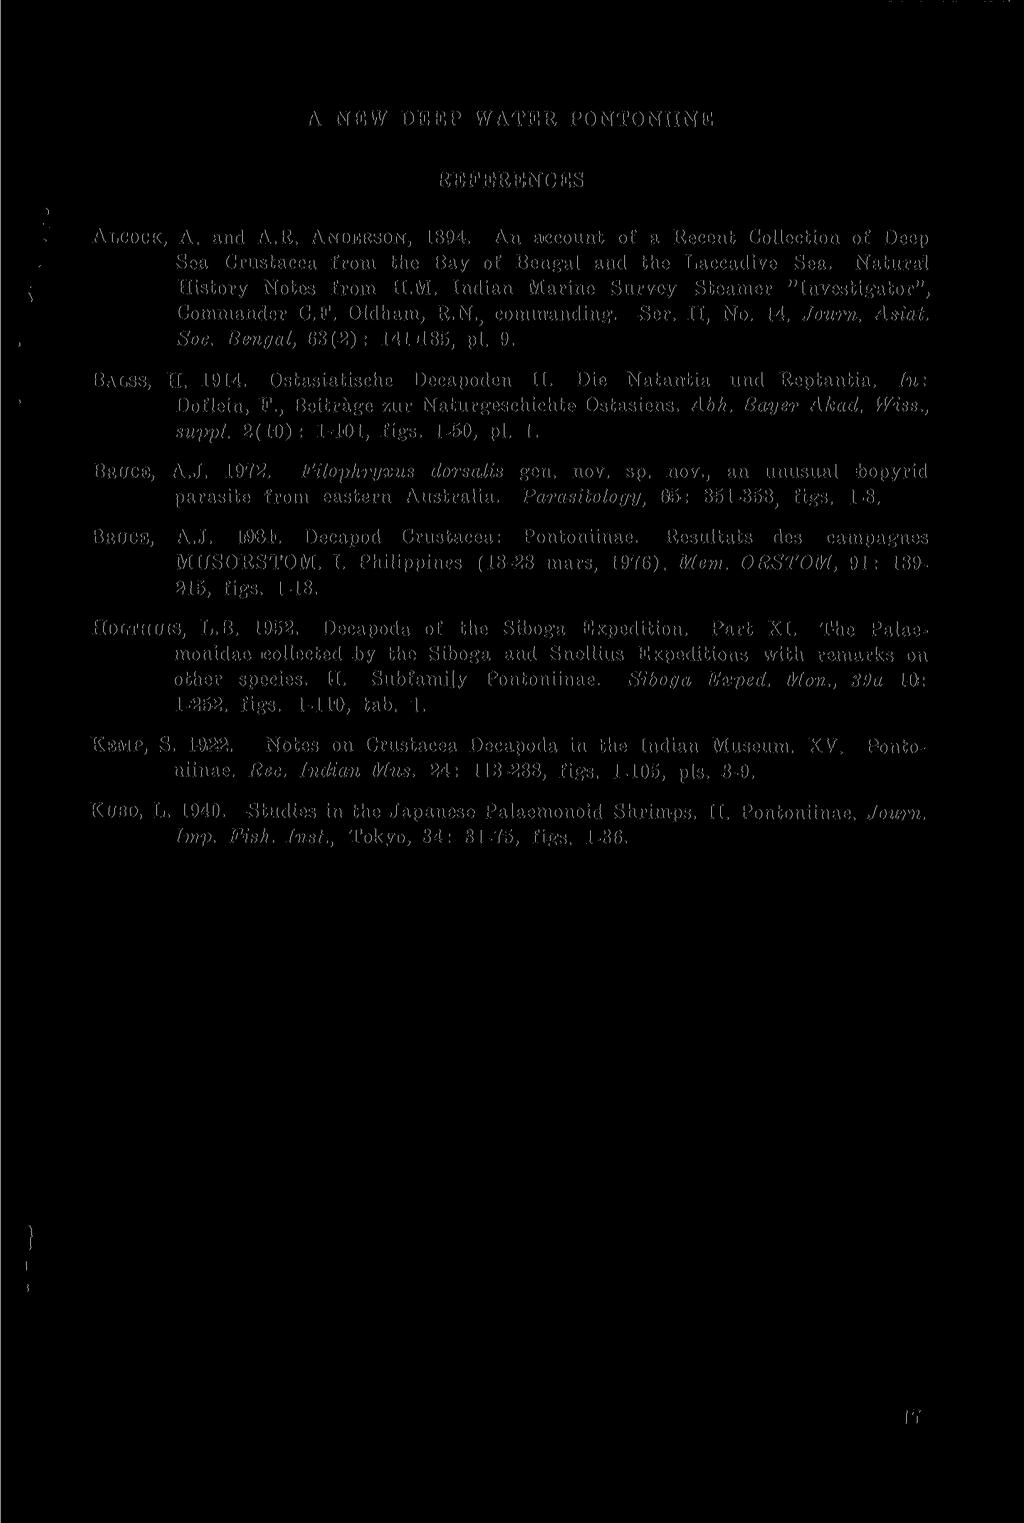 A NEW.DEEP WATER PONTONIINE REFERENCES ALCOCK, A. and A.R. ANDERSON, 1894. An account of a Recent Collection of Deep Sea Crustacea from the Bay of Bengal and the Laccadive Sea.